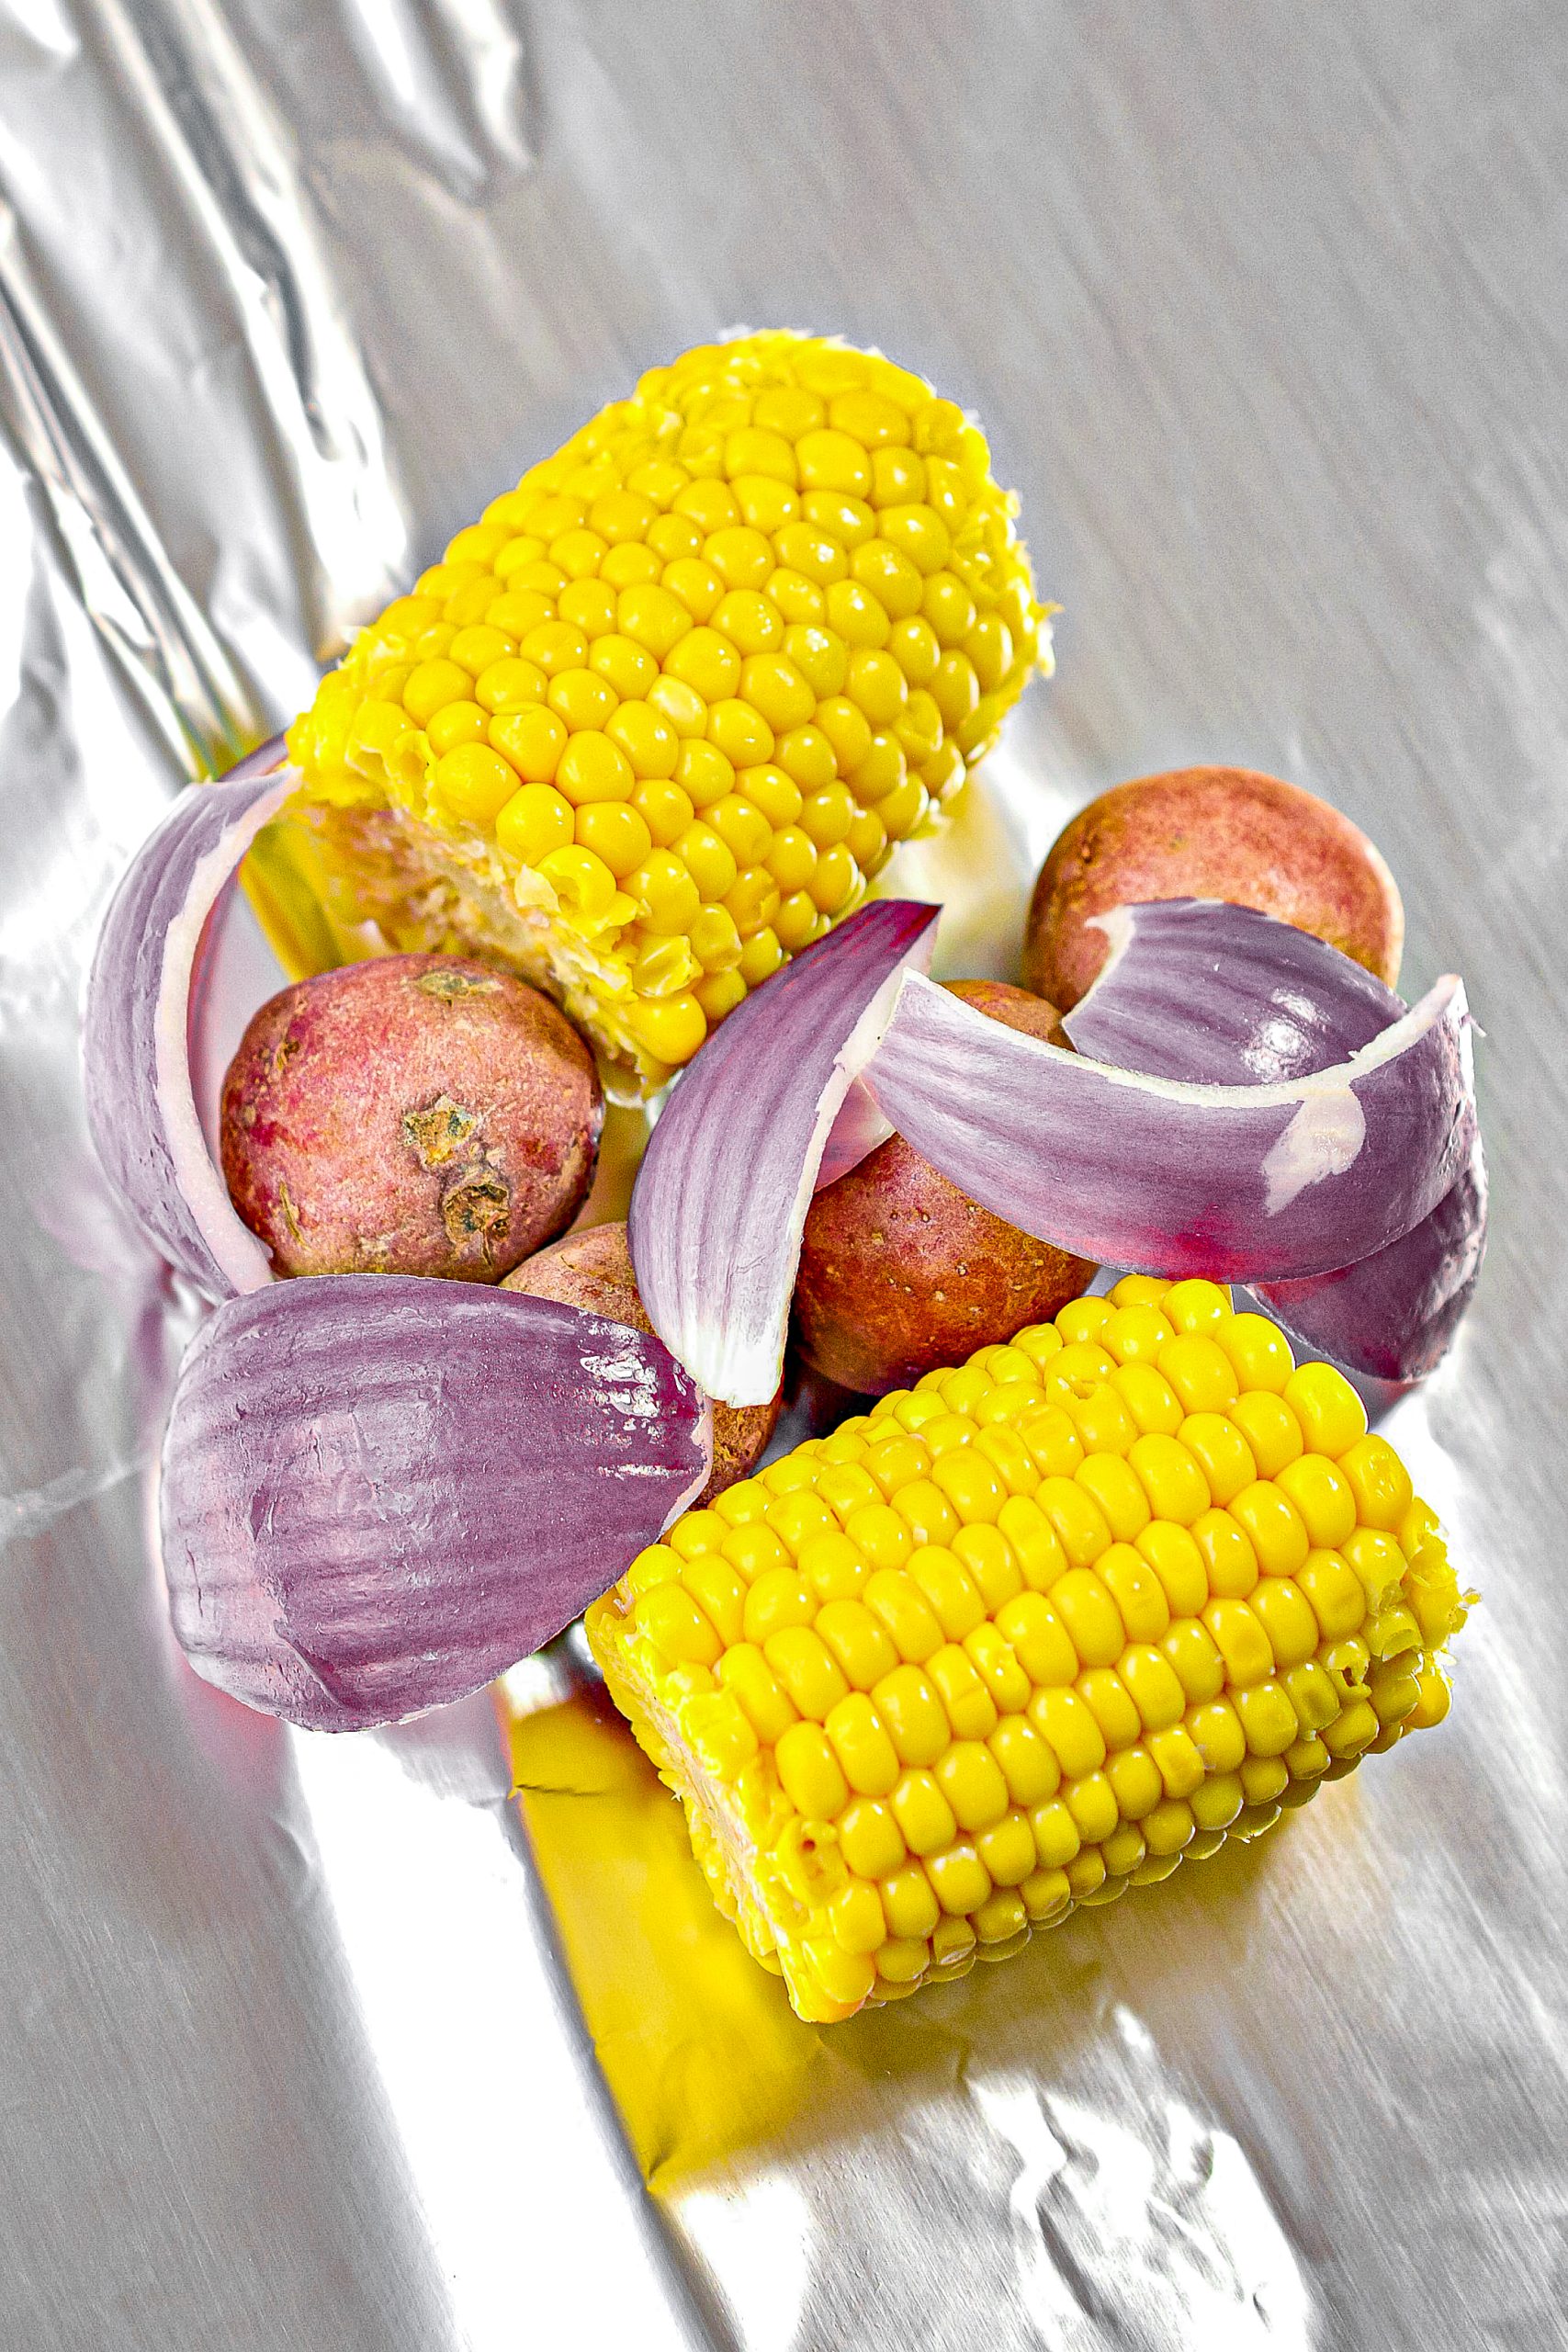 In the center of each sheet of foil, place two pieces of corn on the cob, four baby potatoes, ¼ of the shrimp, ¼ of the sausage, some red onion, red bell pepper, salt, and pepper to taste, and cajun seasoning to taste.